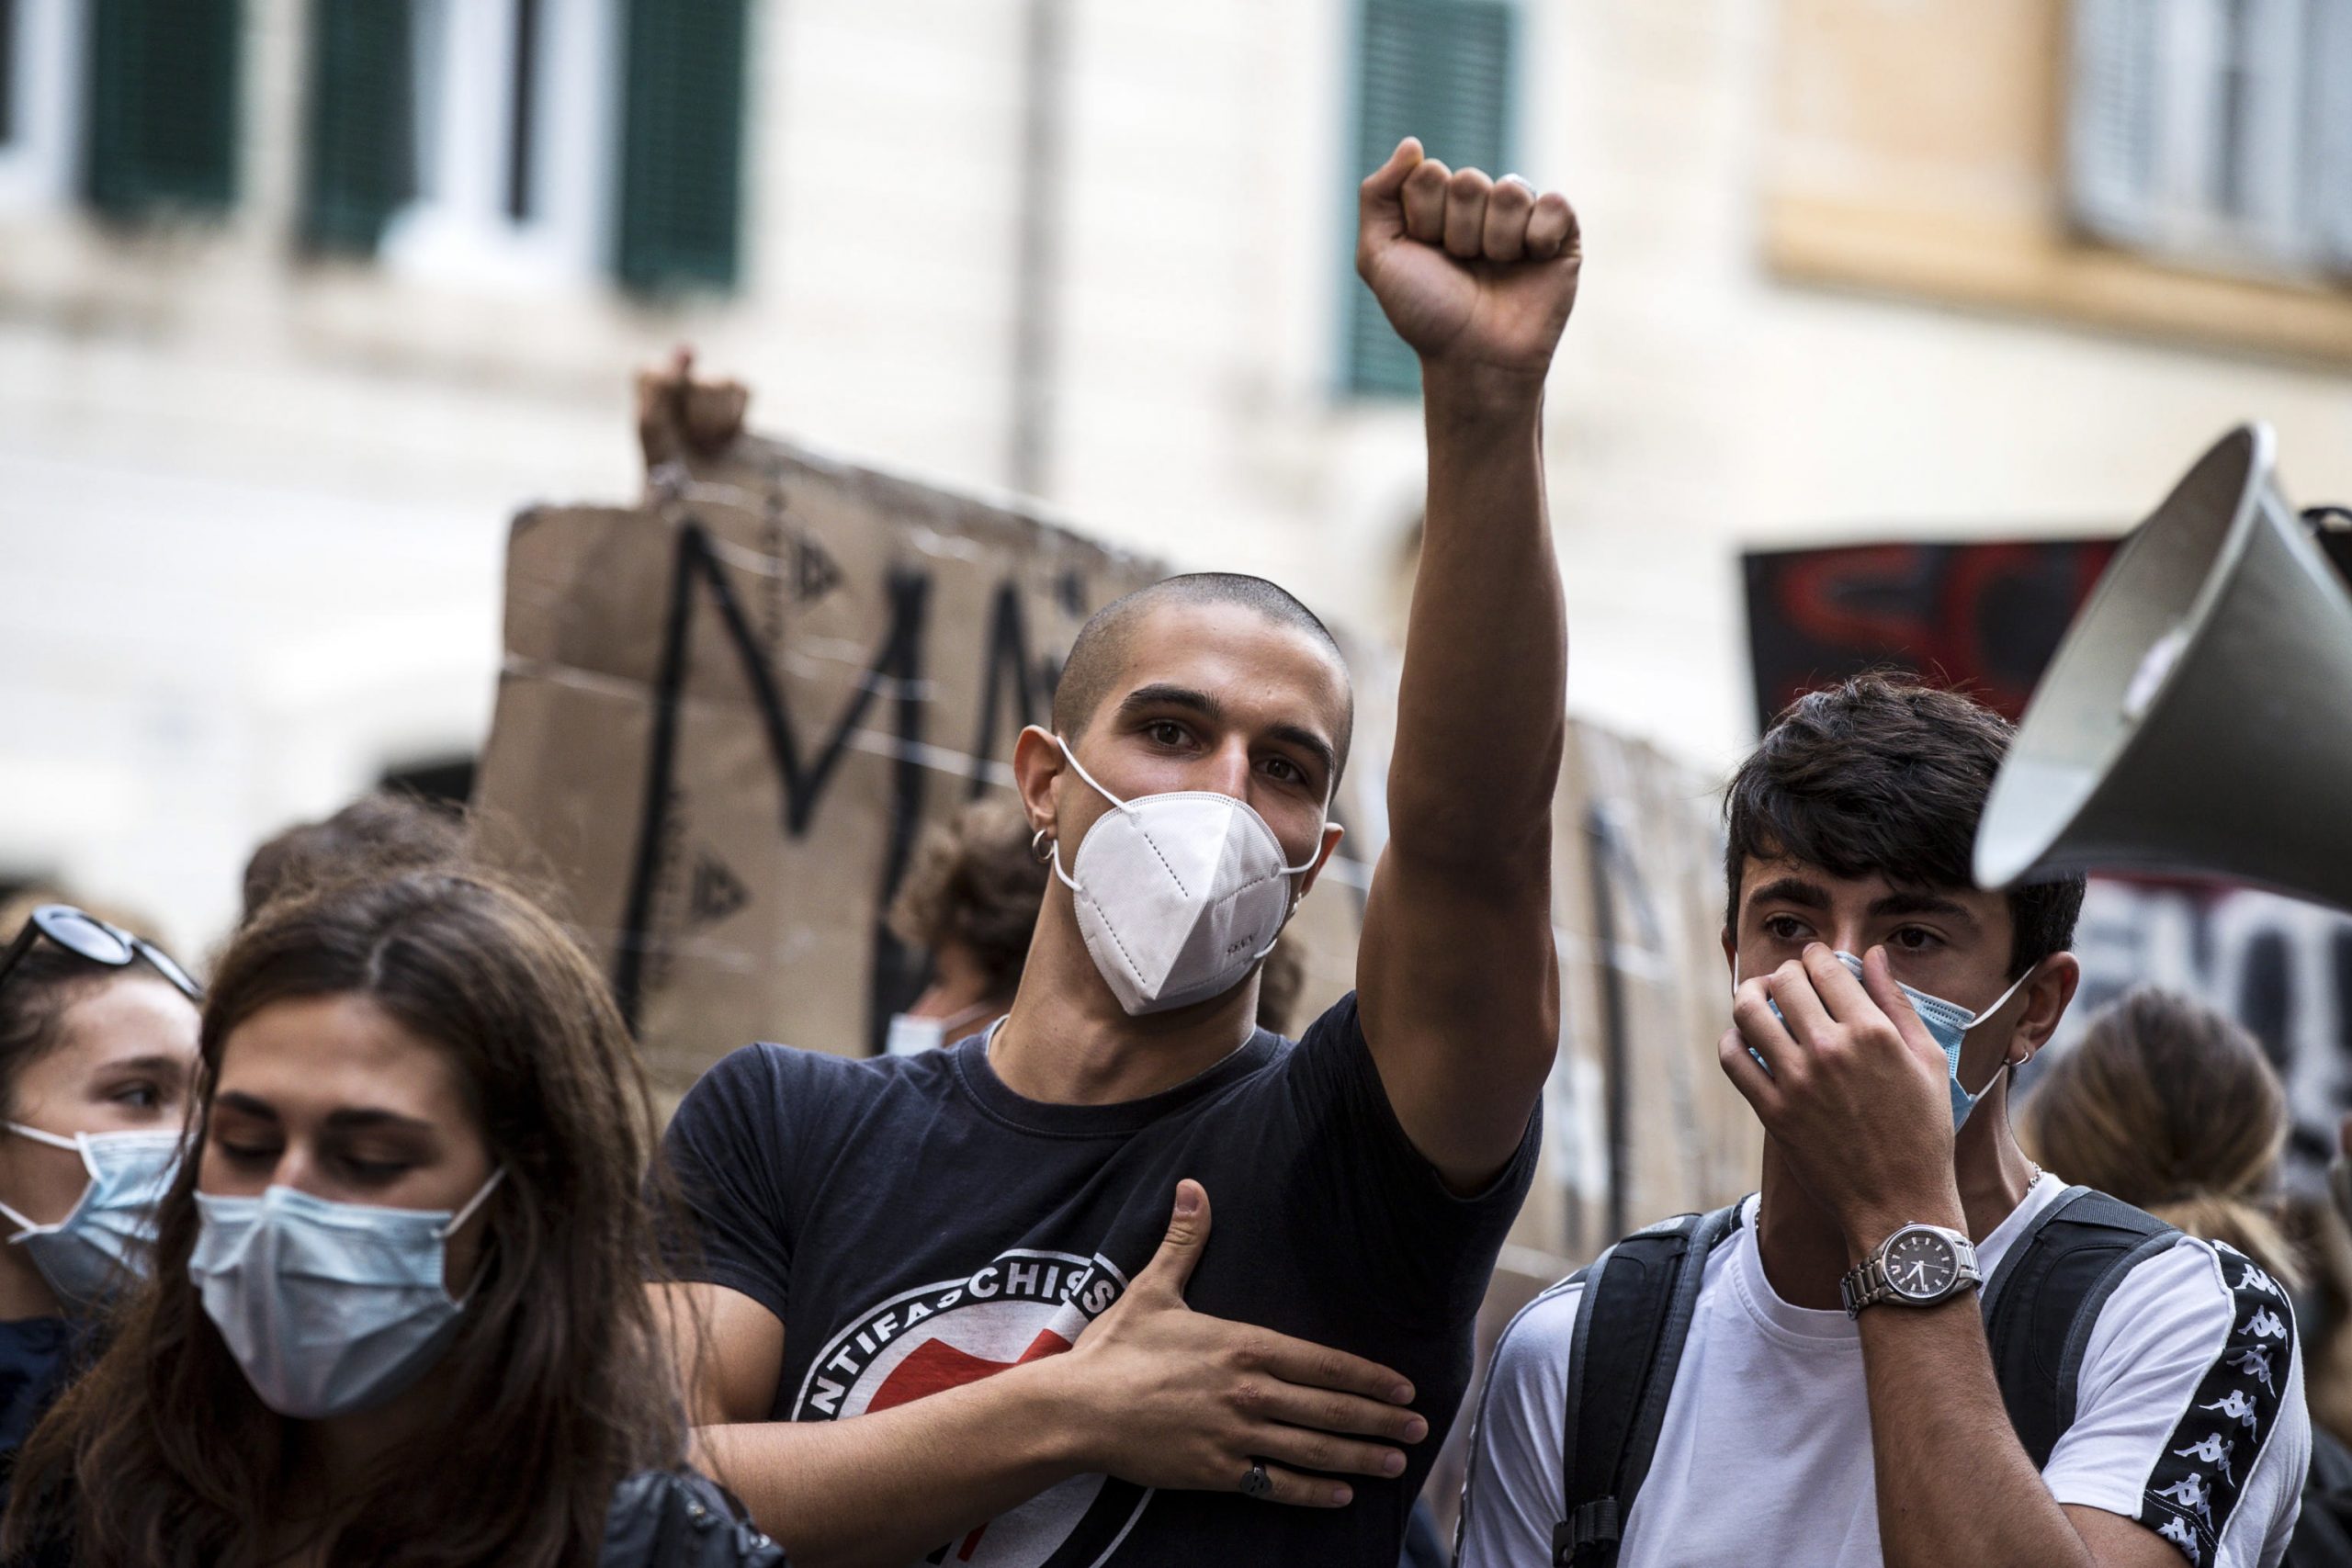 epa08695997 Students gather during a demonstration in Rome, Italy, 25 September 2020. Students are protesting against the rules set up for the opening of schools amid the COVID-19 coronavirus pandemic.  EPA/ANGELO CARCONI